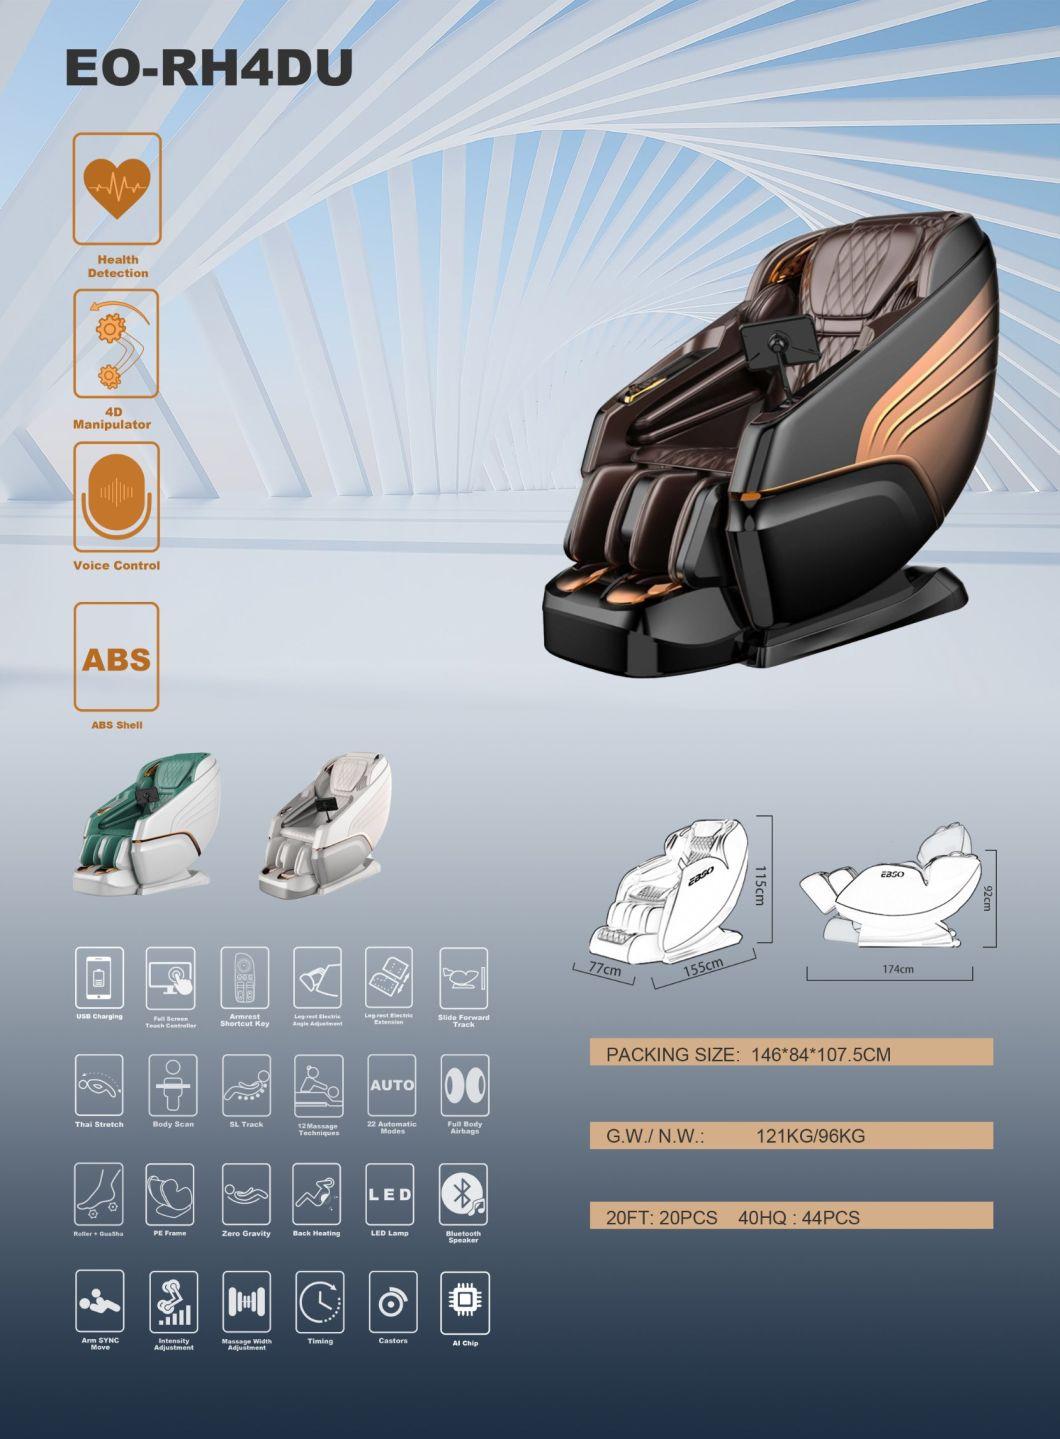 Massage Chair Full Body 2022 4D Massage Chair with Ai Voice Massage Ball Heated with Zero Gravity